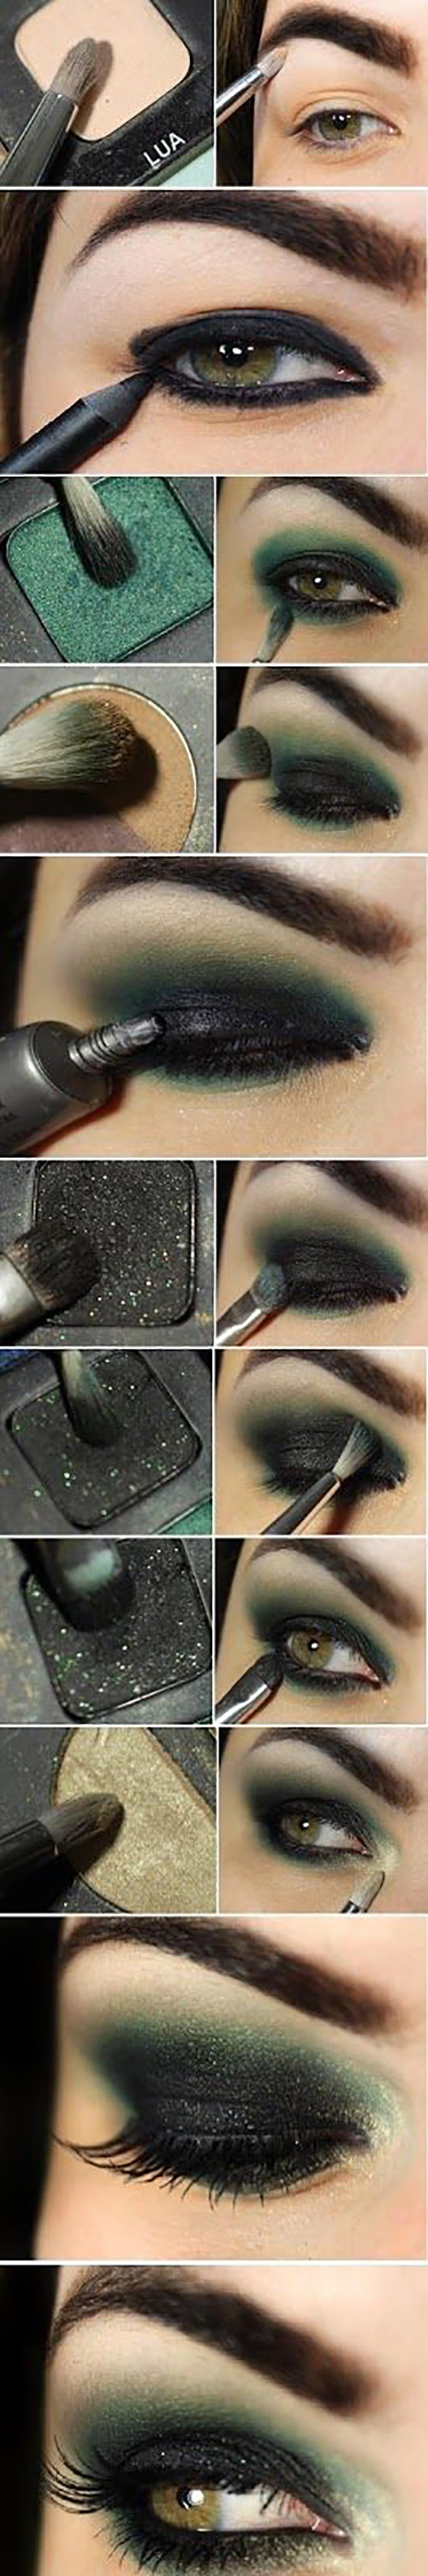 Smokey Eye Makeup Pictures How To Do Smokey Eye Makeup Top 10 Tutorial Pictures For 2019